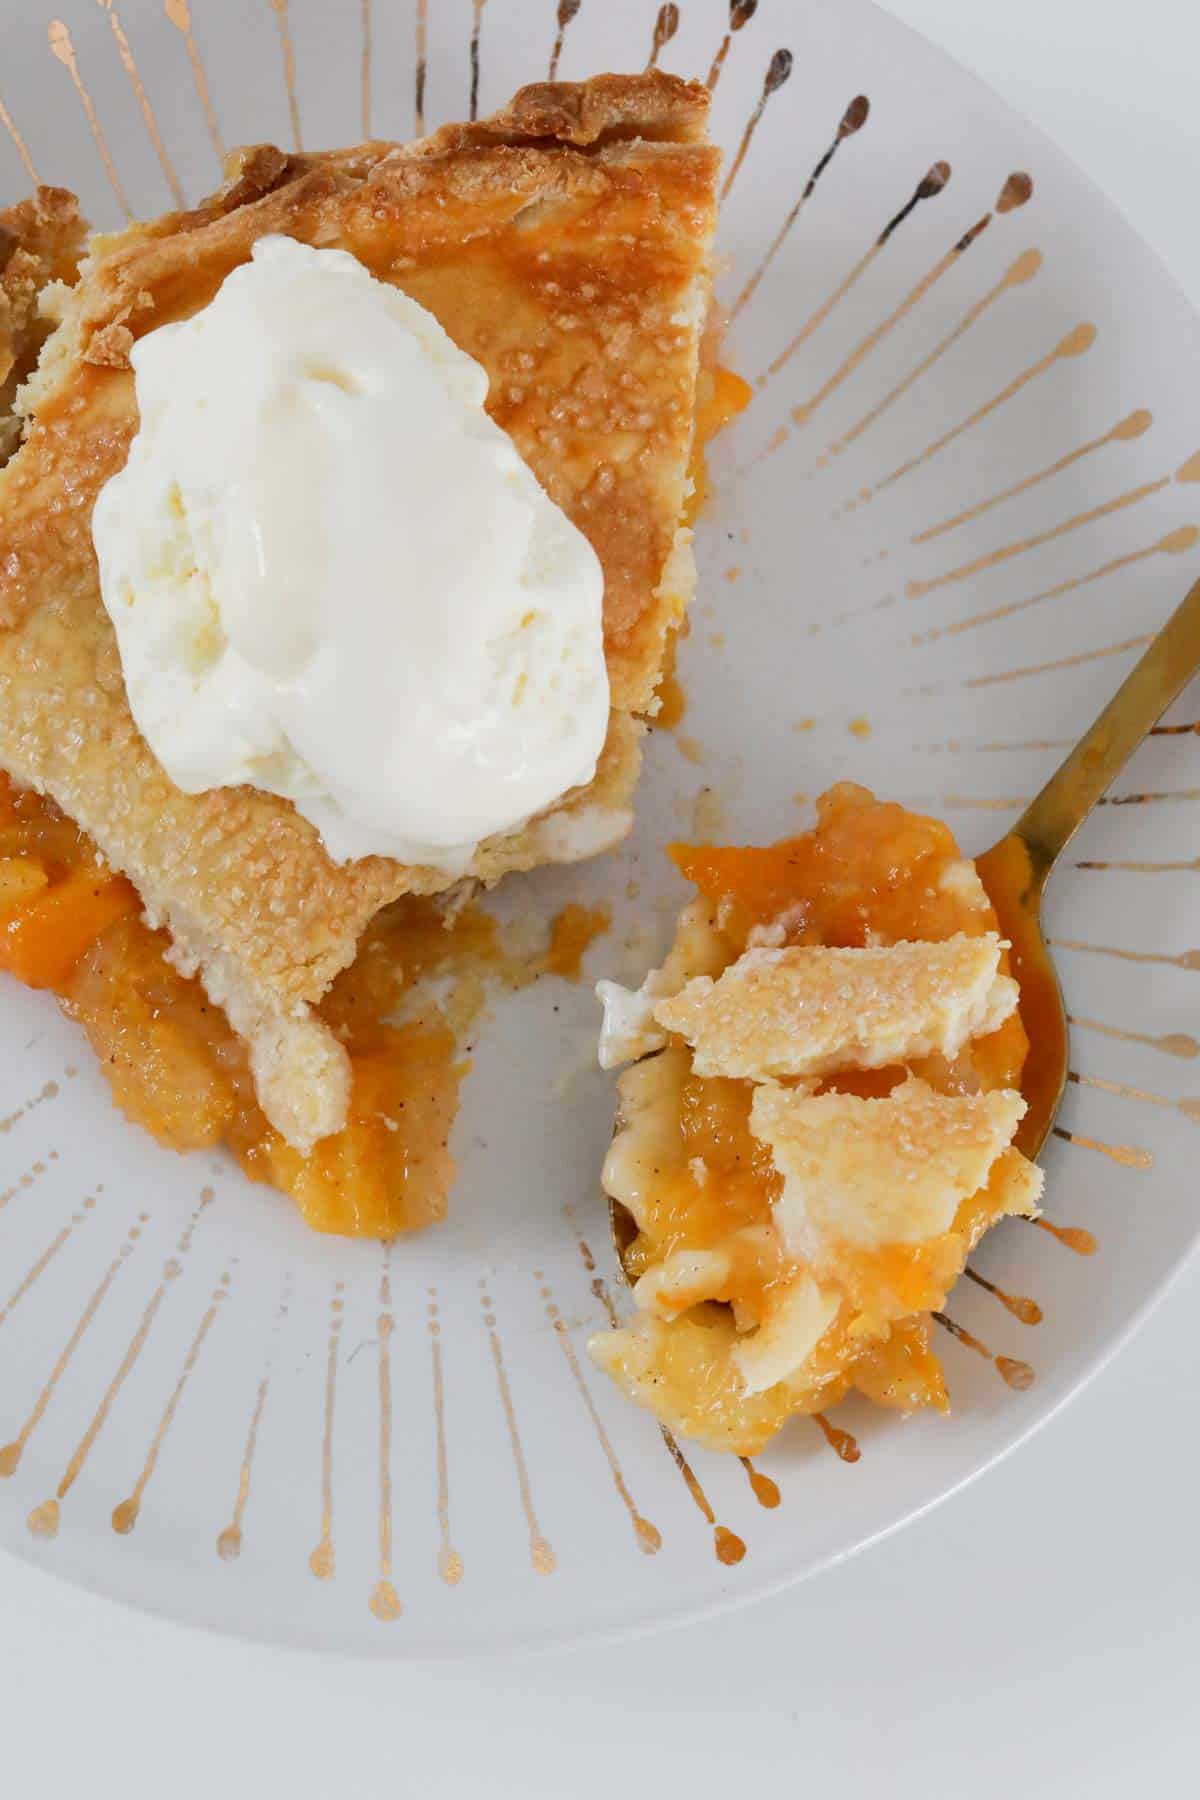 A spoonful of pastry and fruit next to a serve of pie with ice-cream.